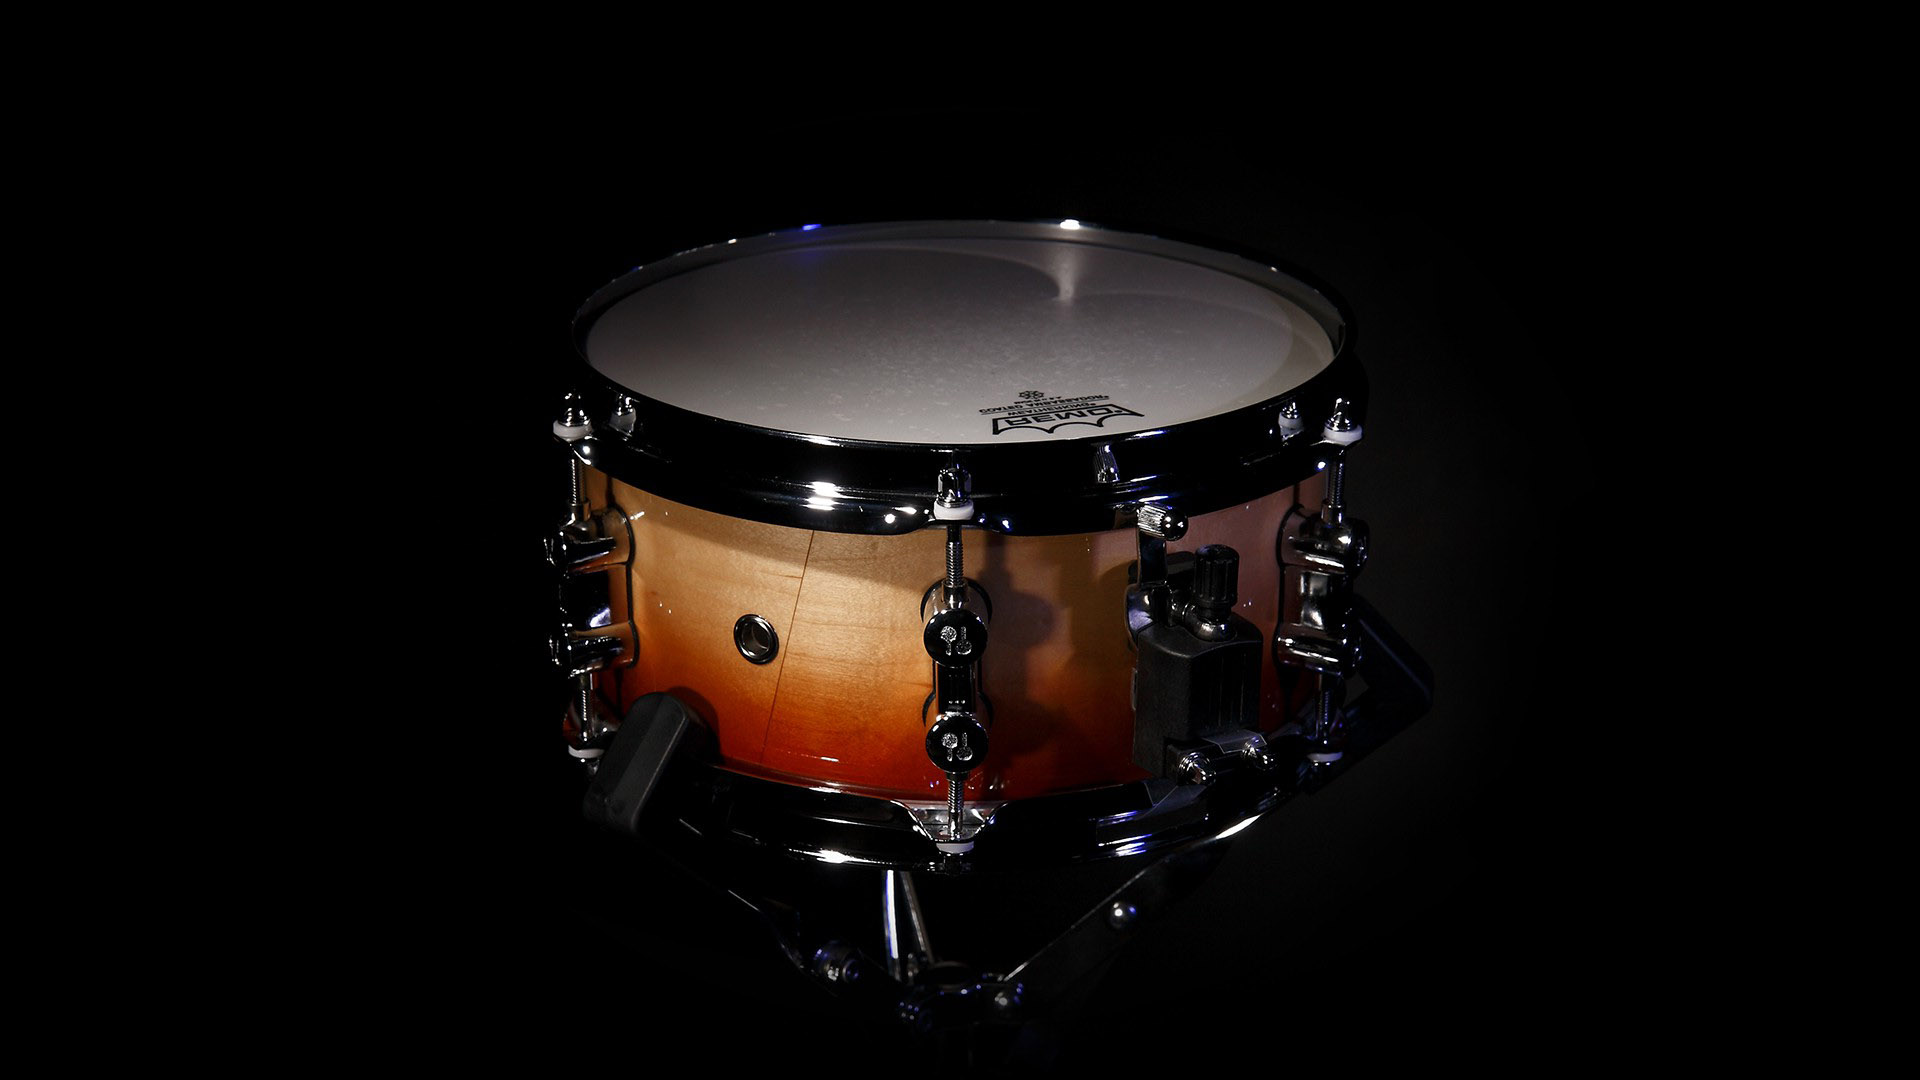 Drum kit 4k ultra hd 16:10 wallpapers hd, desktop backgrounds 3840x2400,  images and pictures